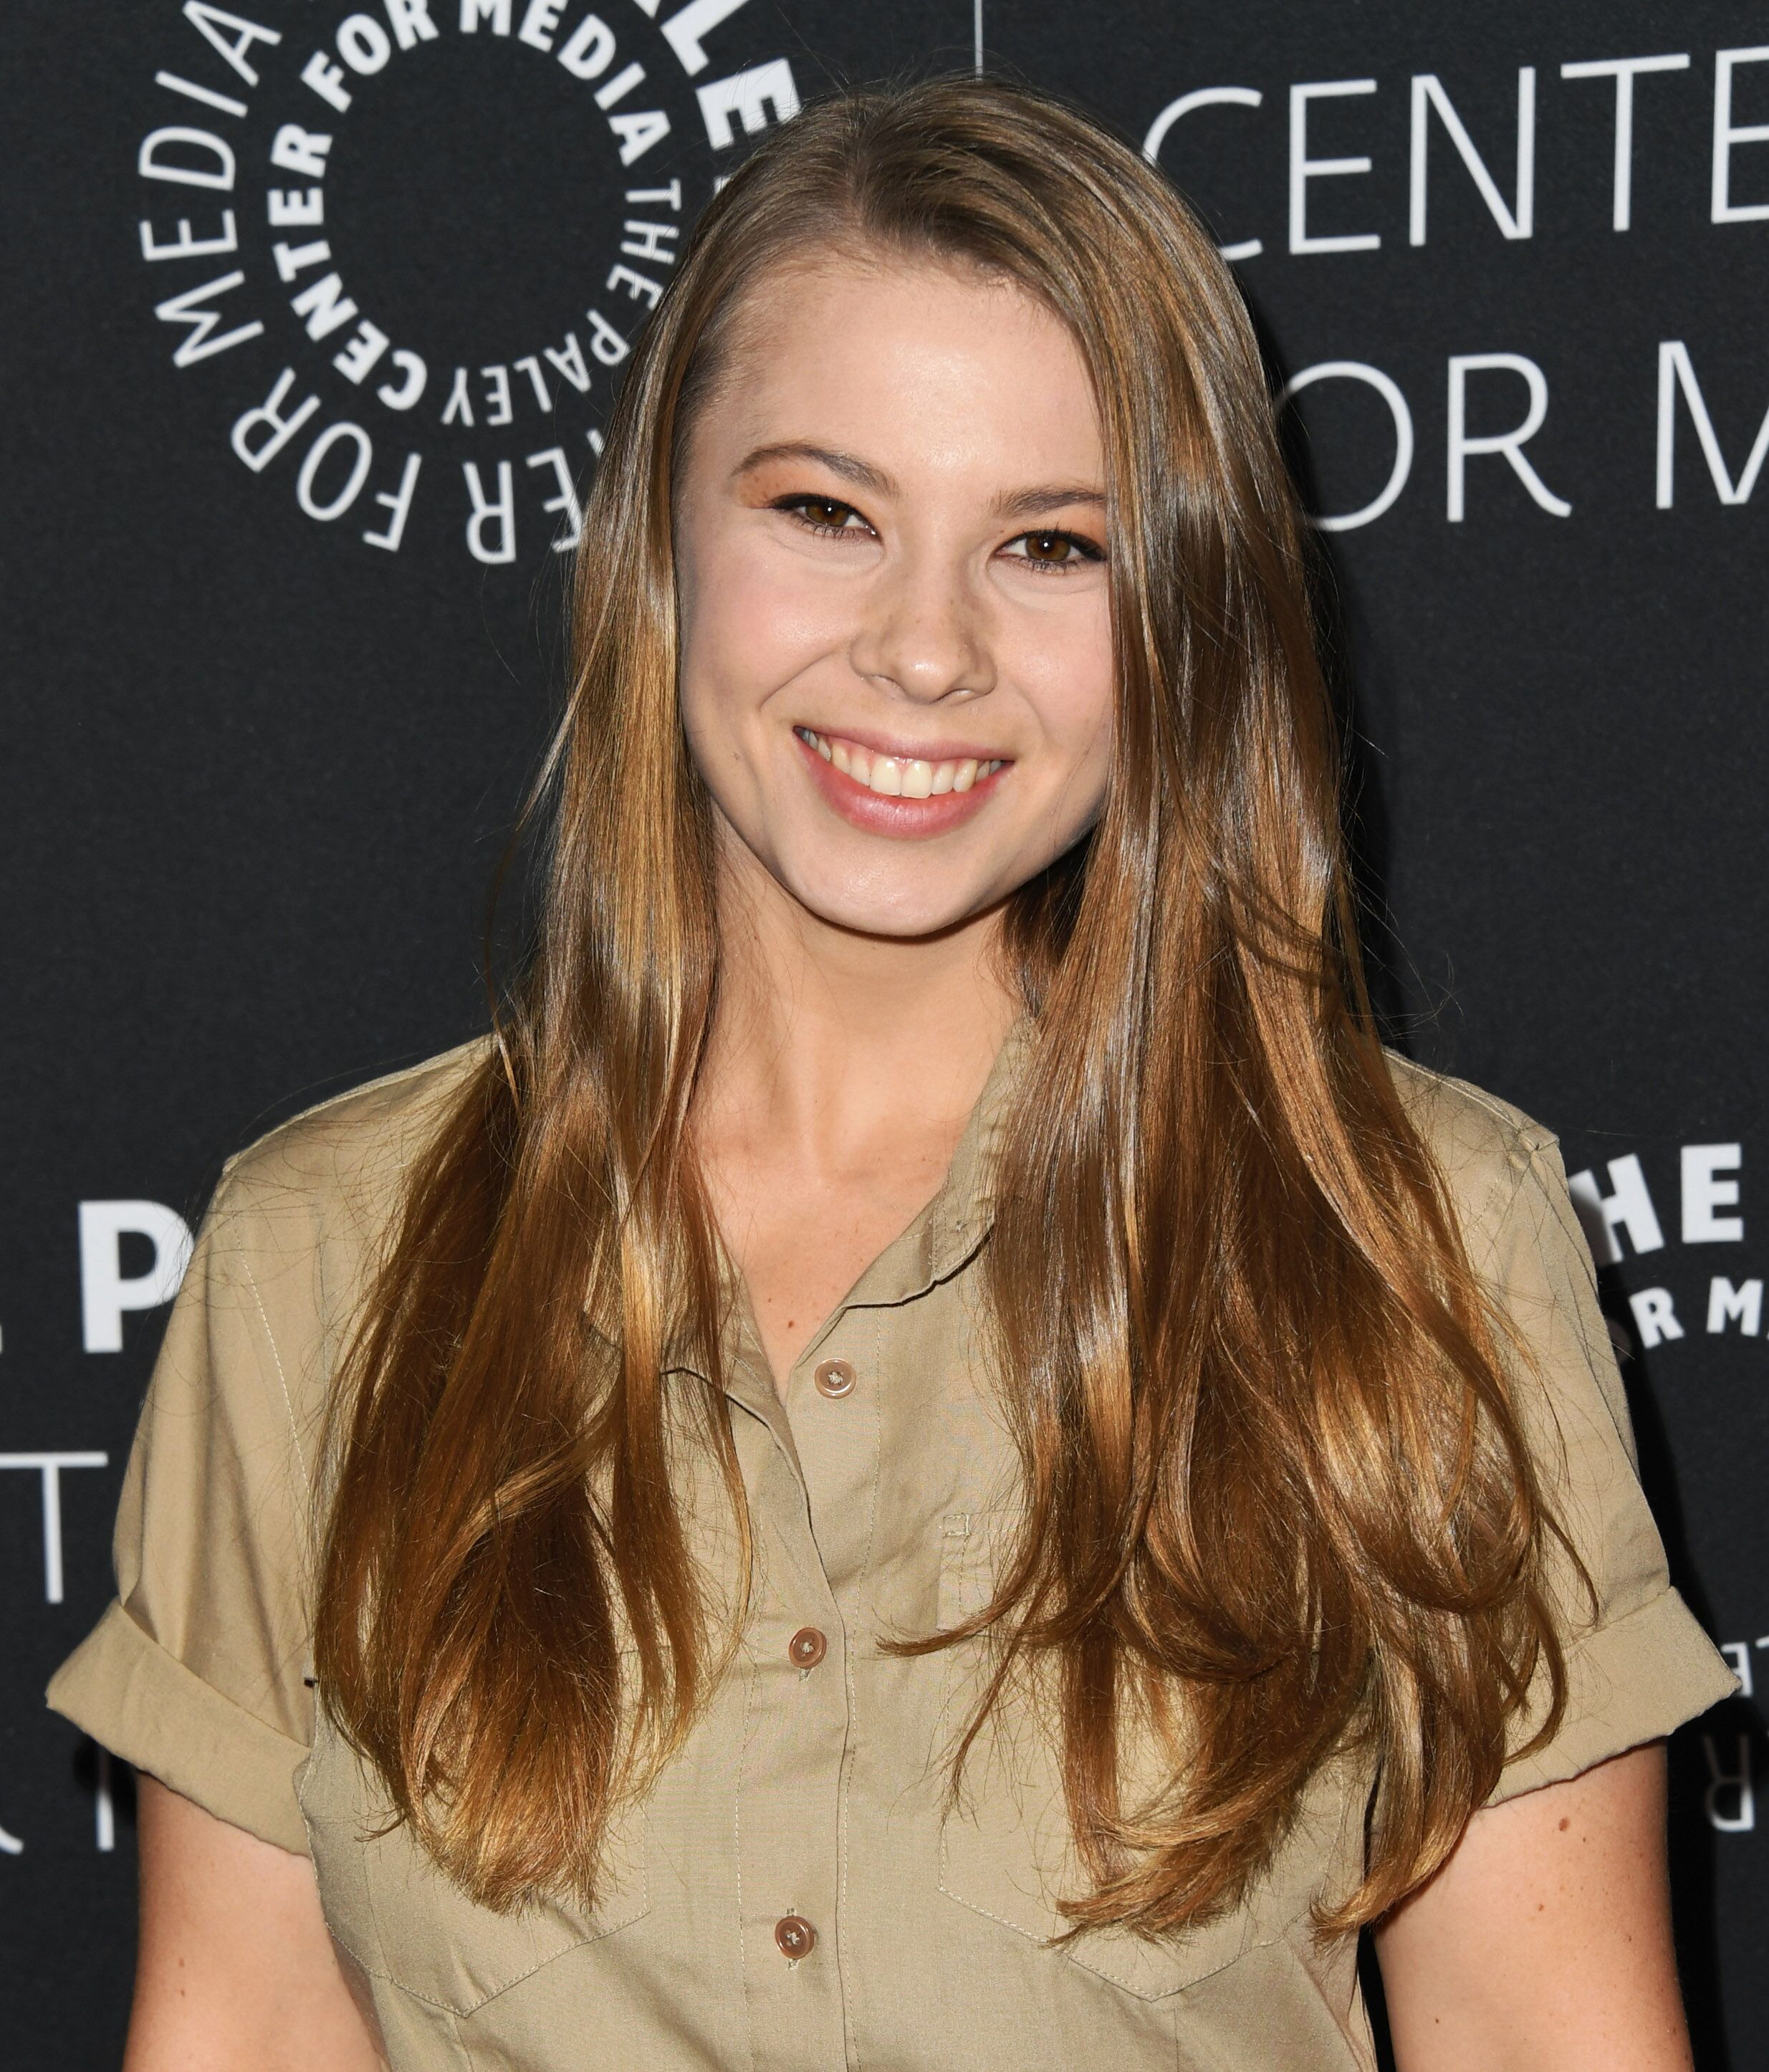 Bindi Irwin at The Paley Center For Media Presents An Evening With The Irwins "Crikey! It's The Irwins" Screening And Conversation on May 03, 2019, in Beverly Hills, California | Photo: Jon Kopaloff/Getty Images